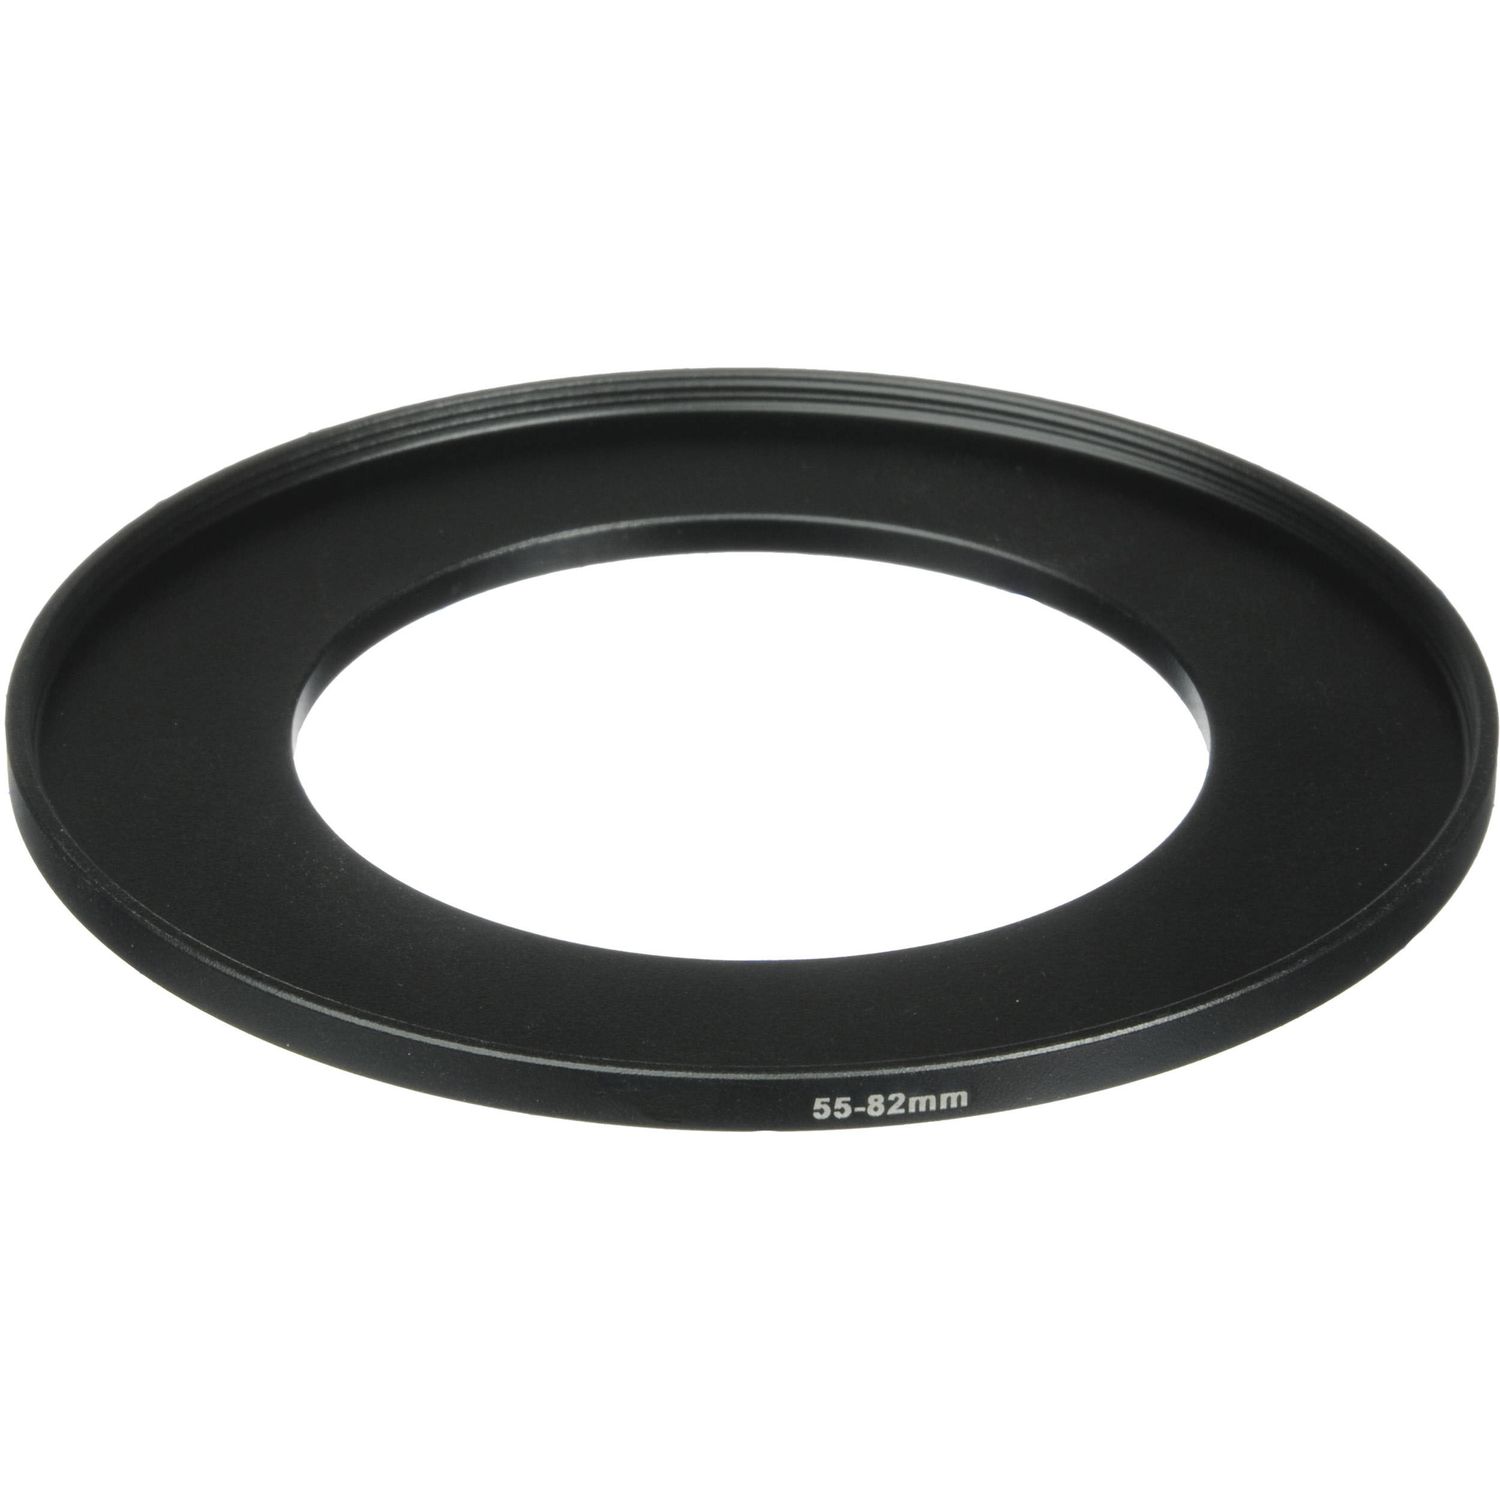 Focus Step Up Ring 55-82mm